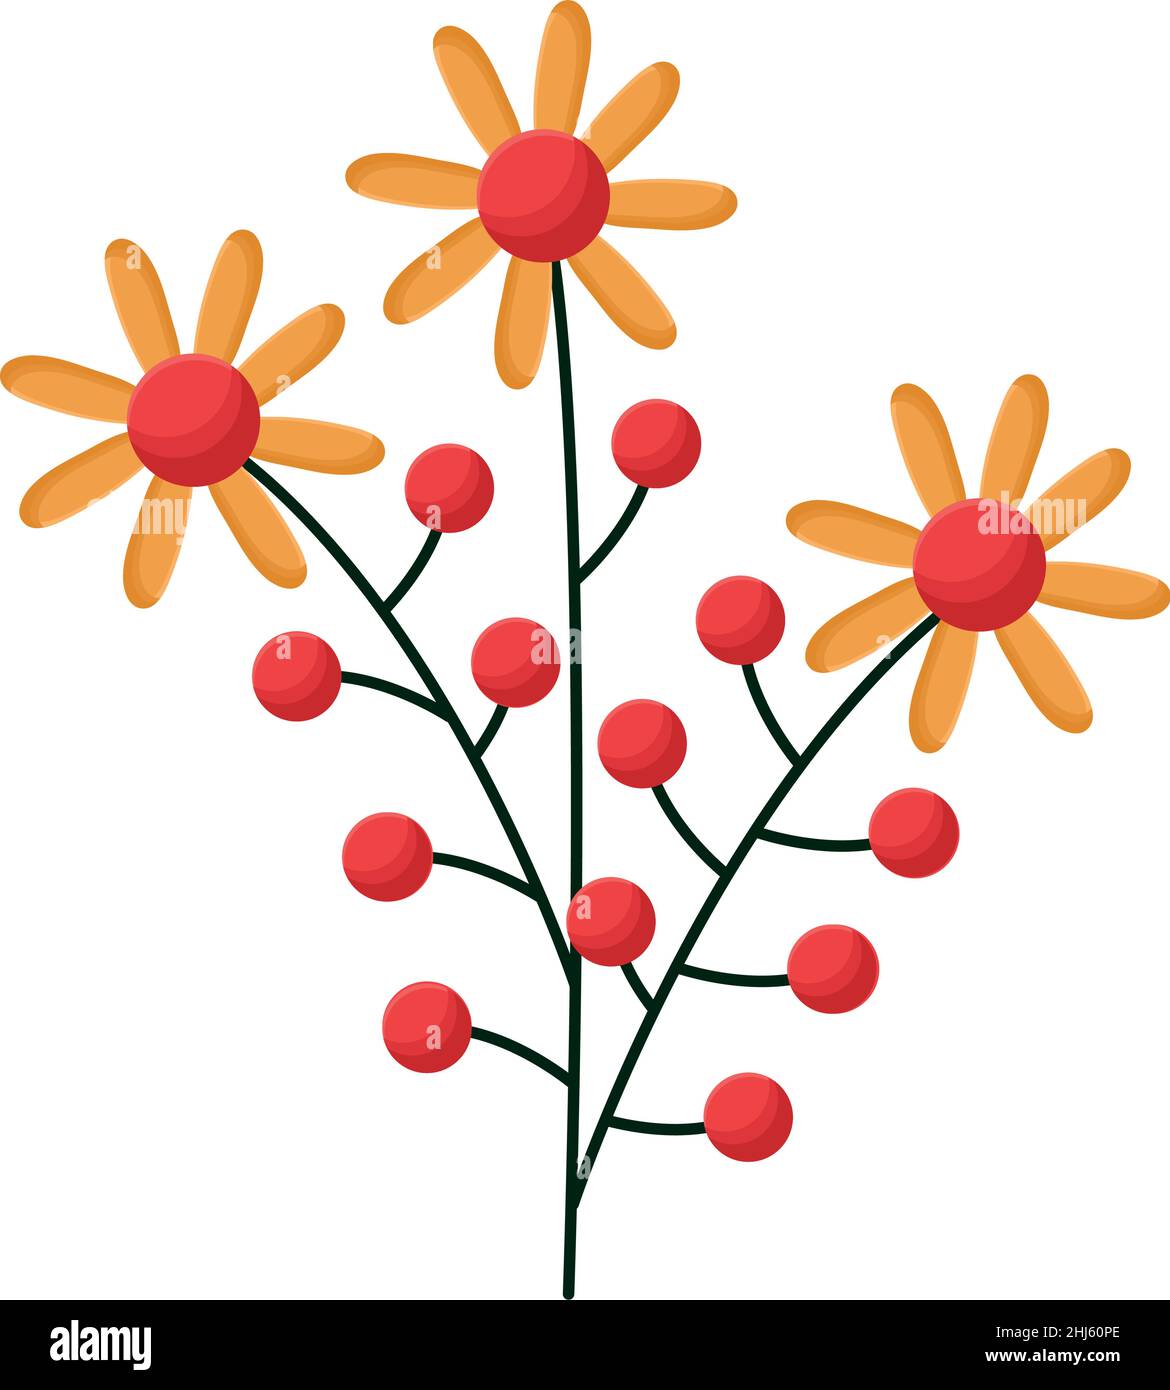 ornage flowers branch Stock Vector